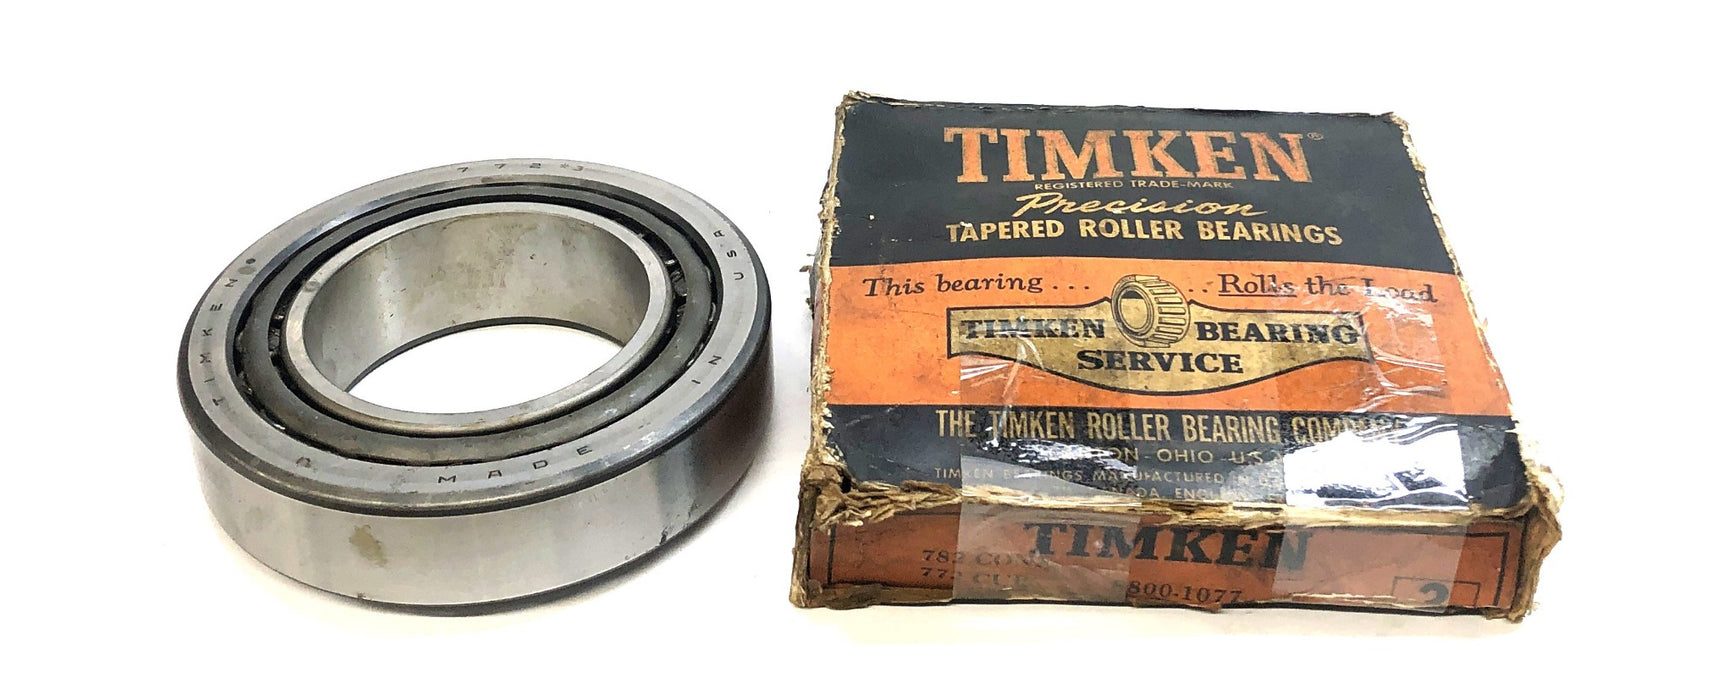 Timken Tapered Roller Bearing Cone And Cup Set 782/772 (8800-1077) NOS